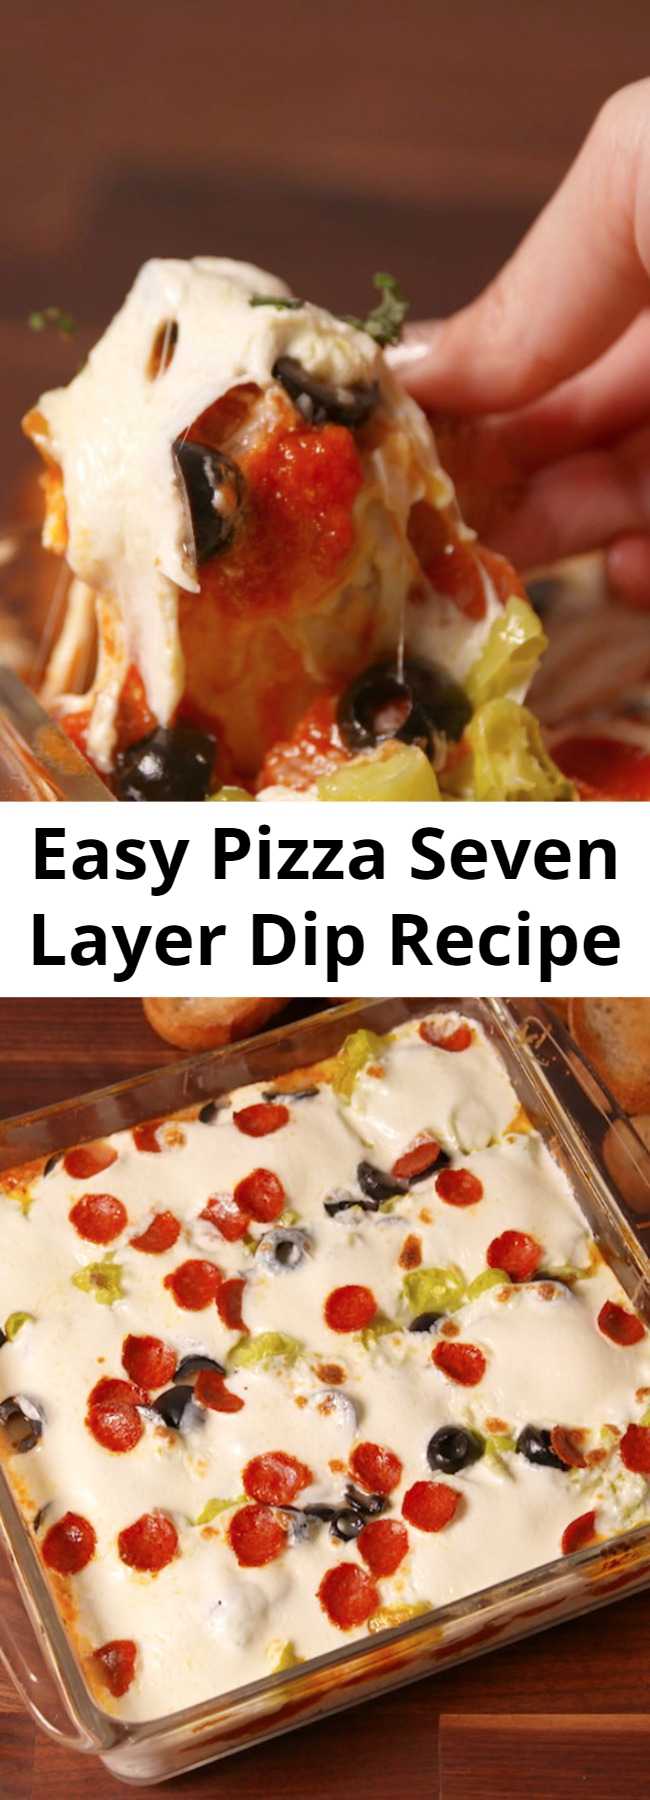 Easy Pizza Seven Layer Dip Recipe - This pizza seven-layer dip is the cheesiest party appetizer you'll ever have. #easyrecipes #dips #fingerfoods #pizzadip #partyapps #partyappetizers #superbowlrecipes